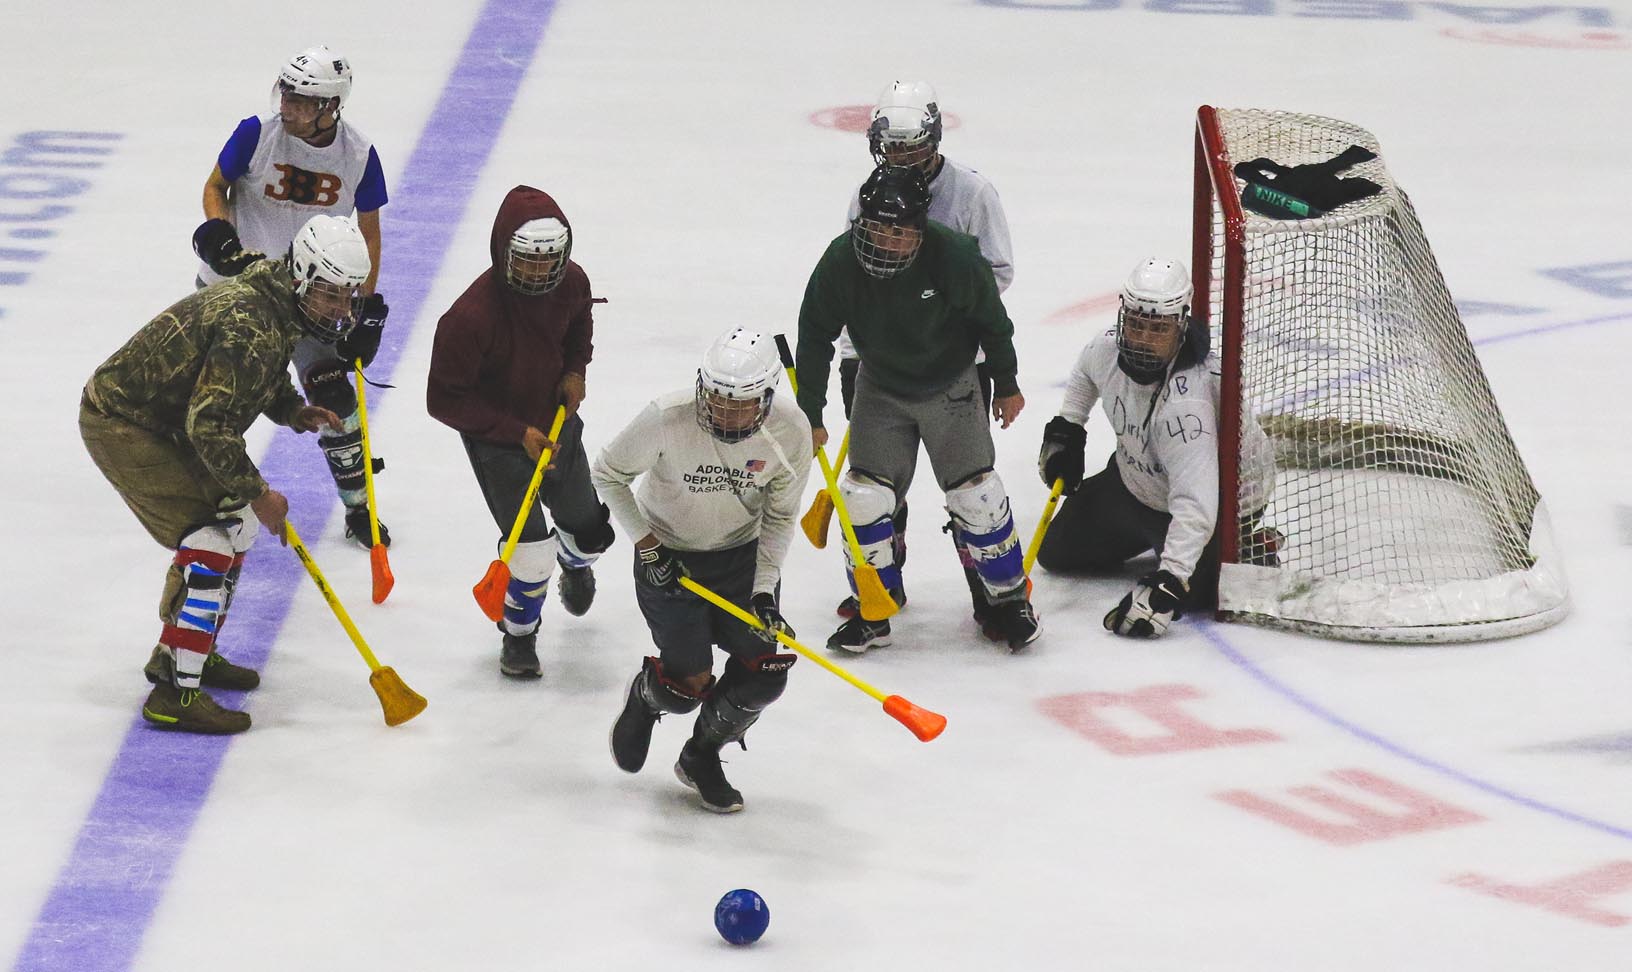 Broomball, a hockey-like game played at Kearney’s Viaero Center, is among the intramural sports and activities offered by UNK Campus Recreation.